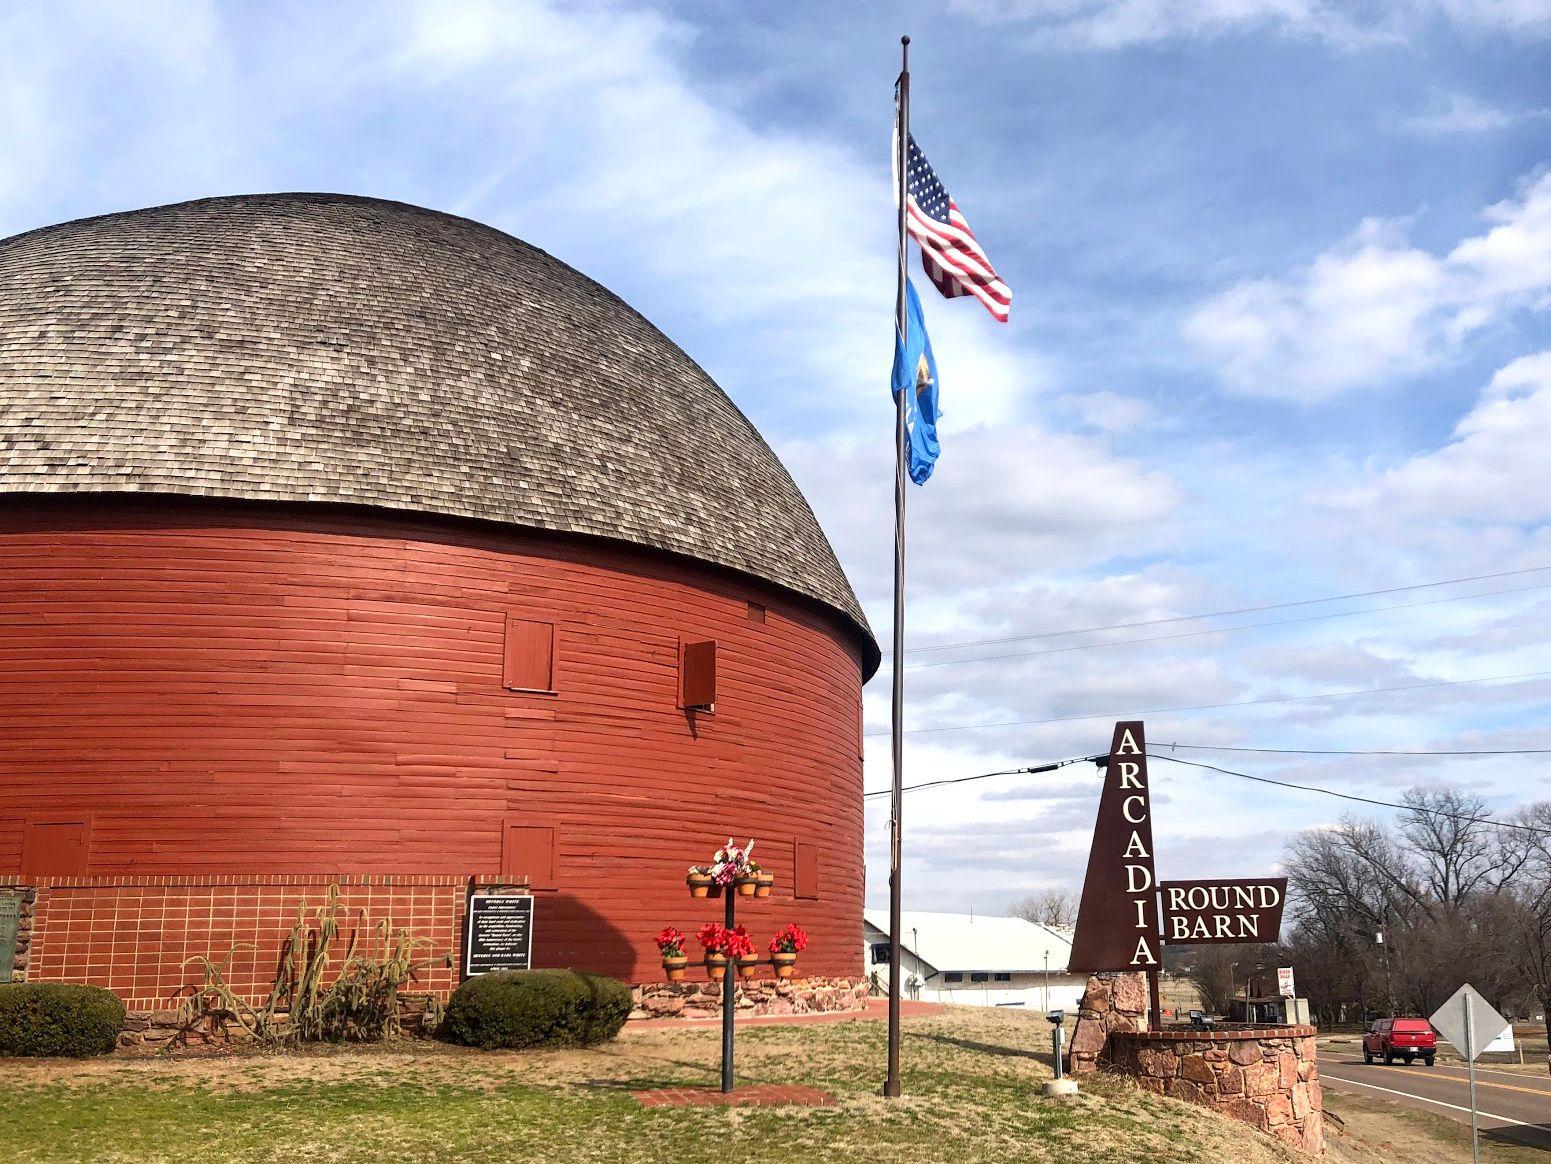 An orange, round barn with a rounded brown roof. There is a sign for Arcadia Round Barn and an American flag.